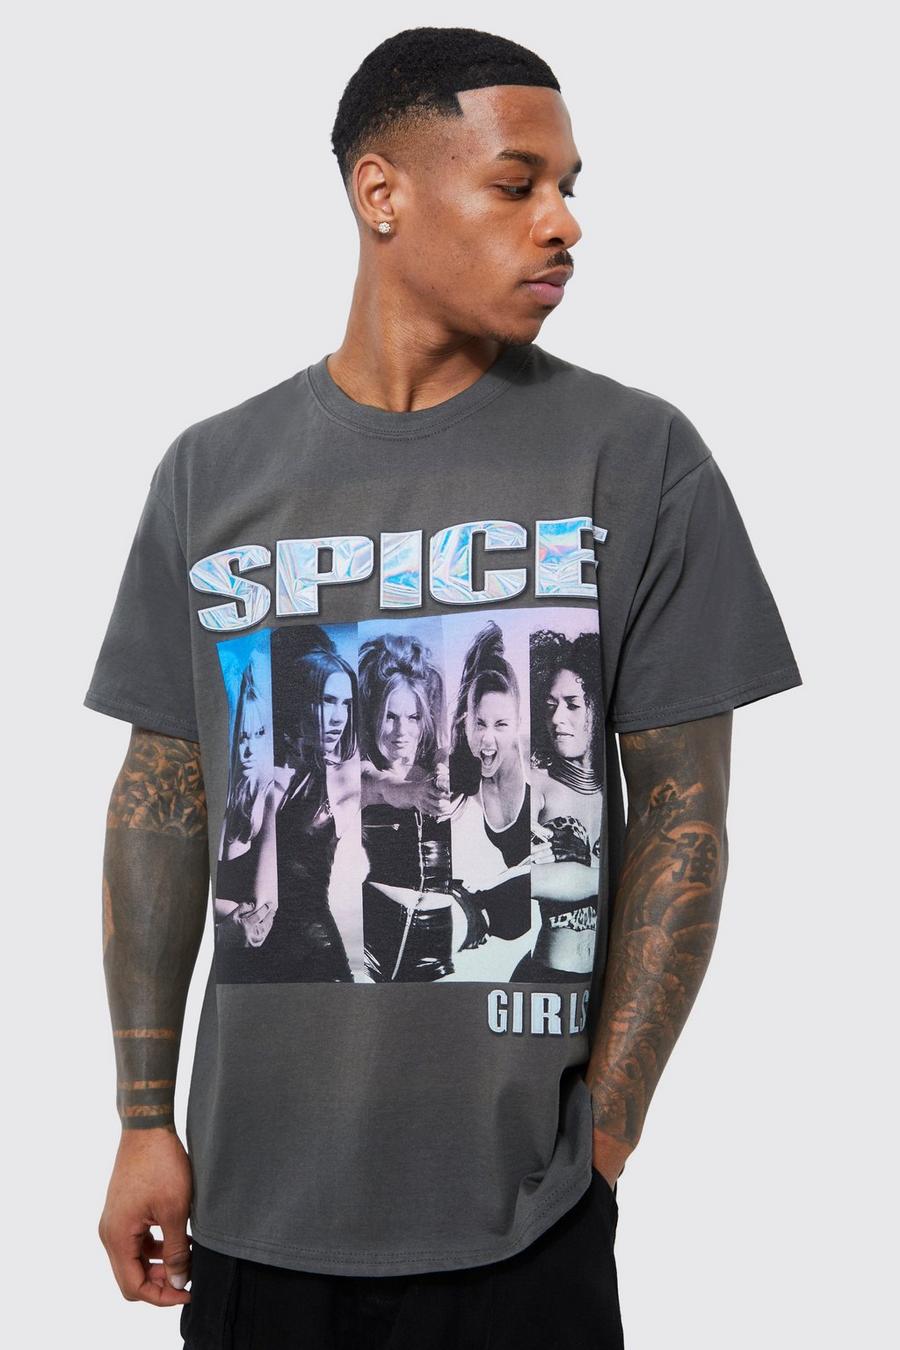 Charcoal grey Oversized Spice Girls License T-shirt